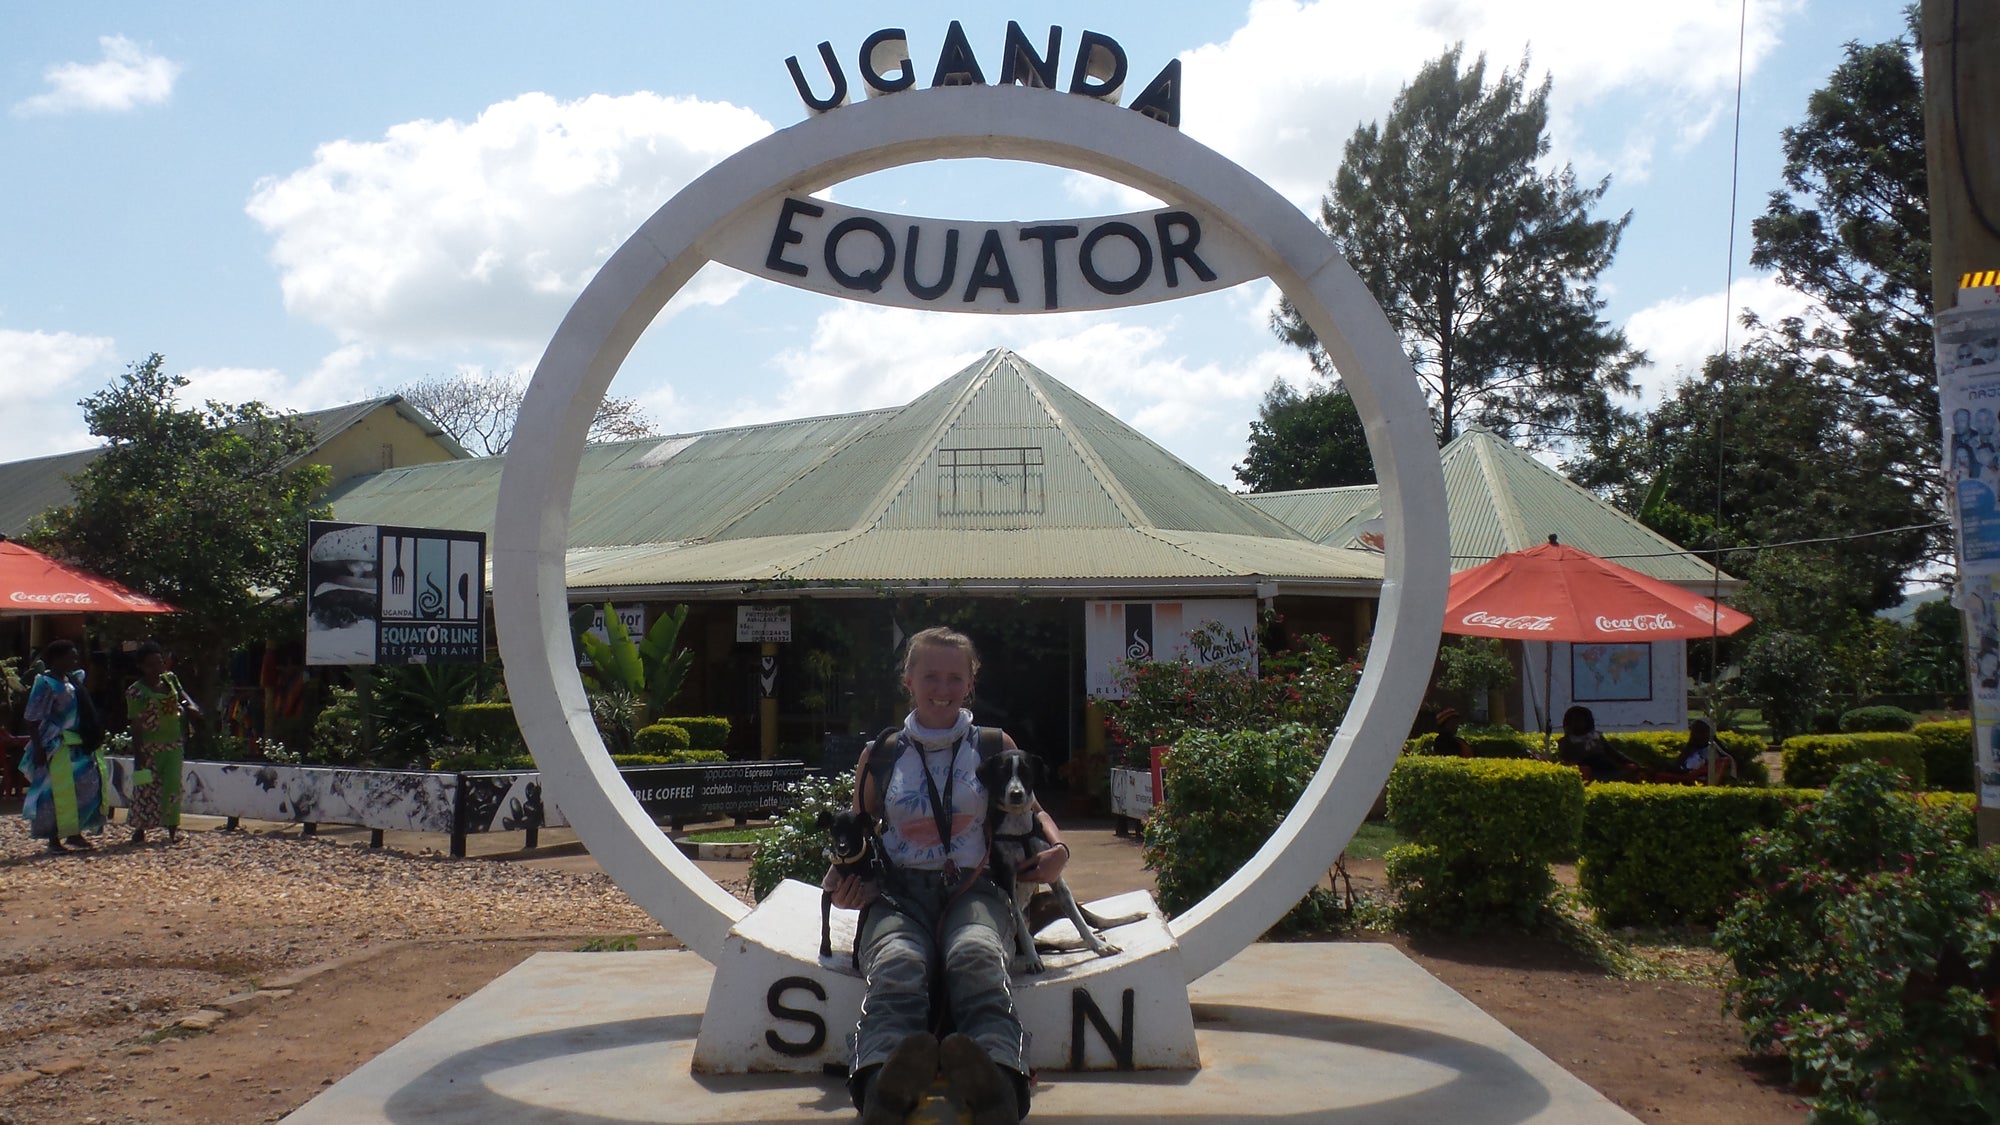 Janell, Weeti and Shadow enjoying a photo opportunity in Uganda with yet another overland equator crossing.